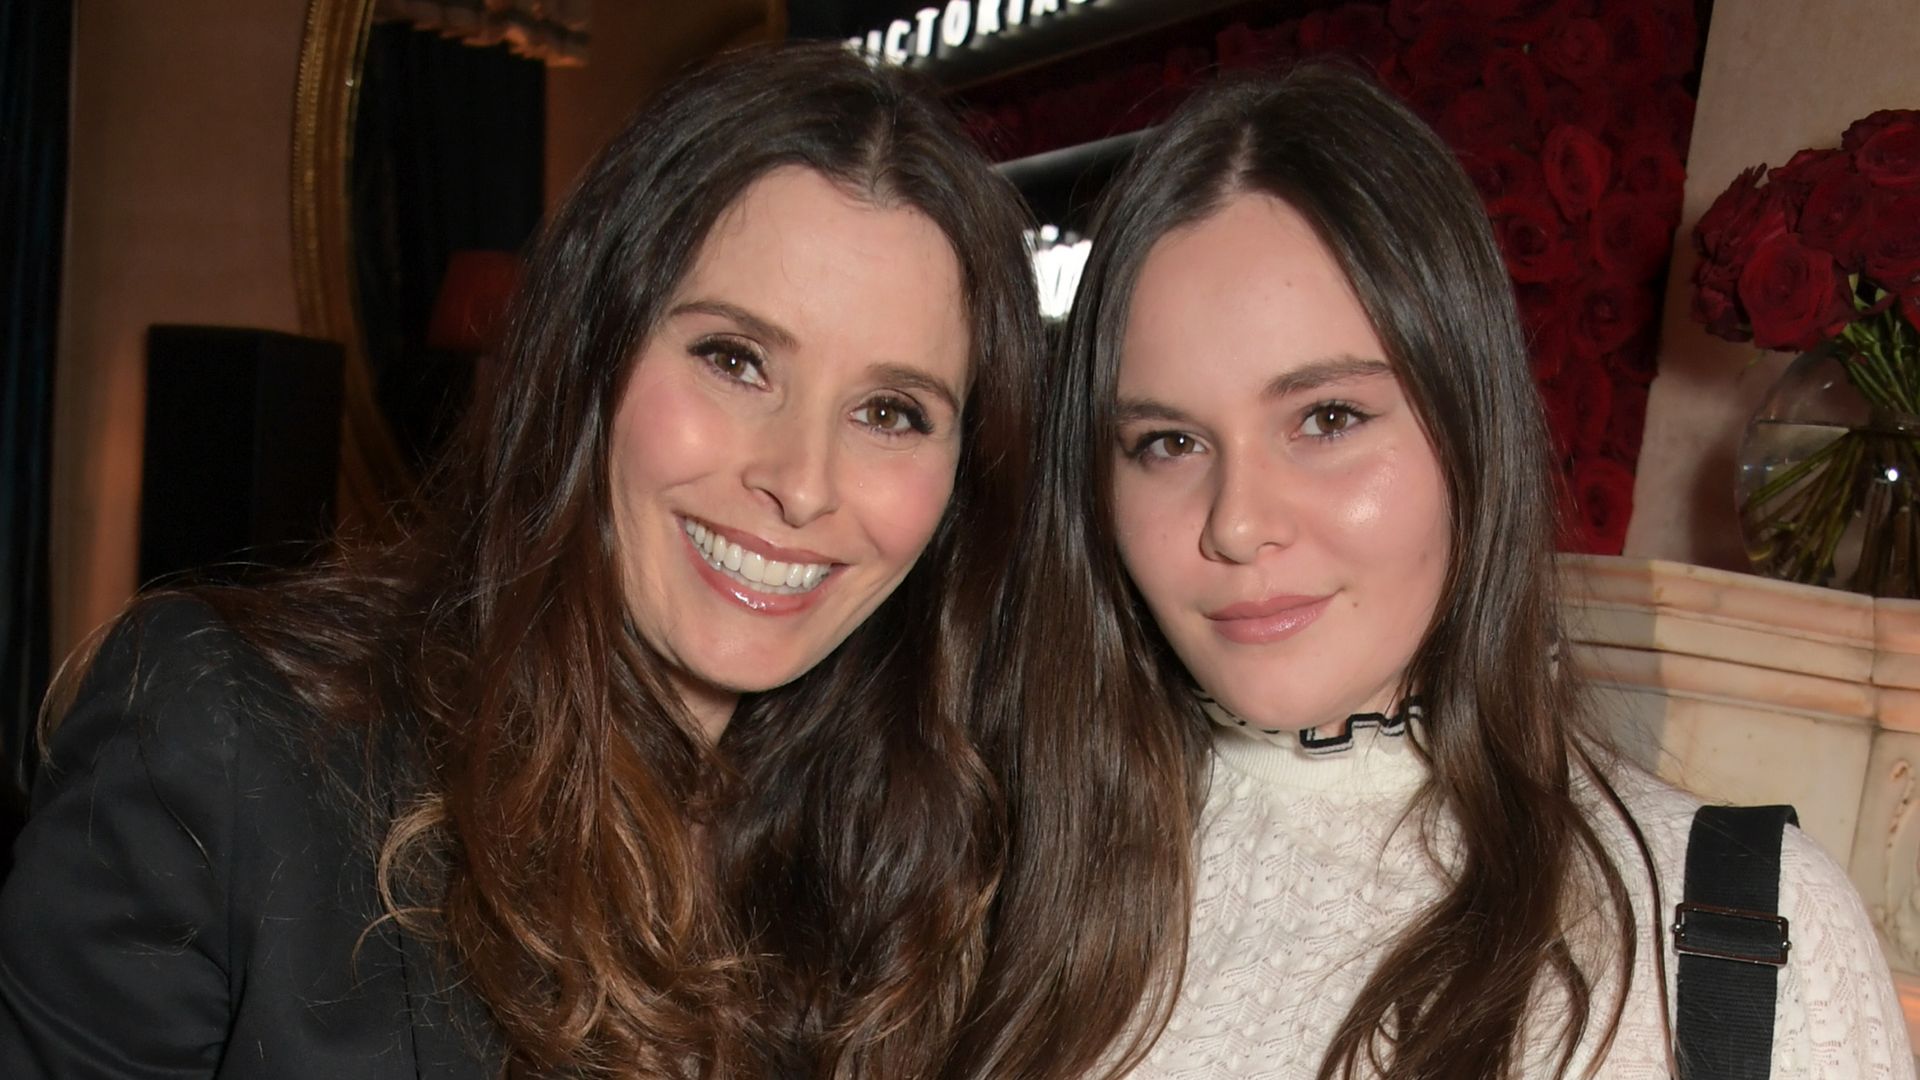 Tana Ramsay and Holly Anna Ramsay attend the Victoria Beckham x YouTube Fashion & Beauty after party at London Fashion Week hosted by Derek Blasberg & David Beckham at Mark's Club on February 17, 2019 in London, England.  